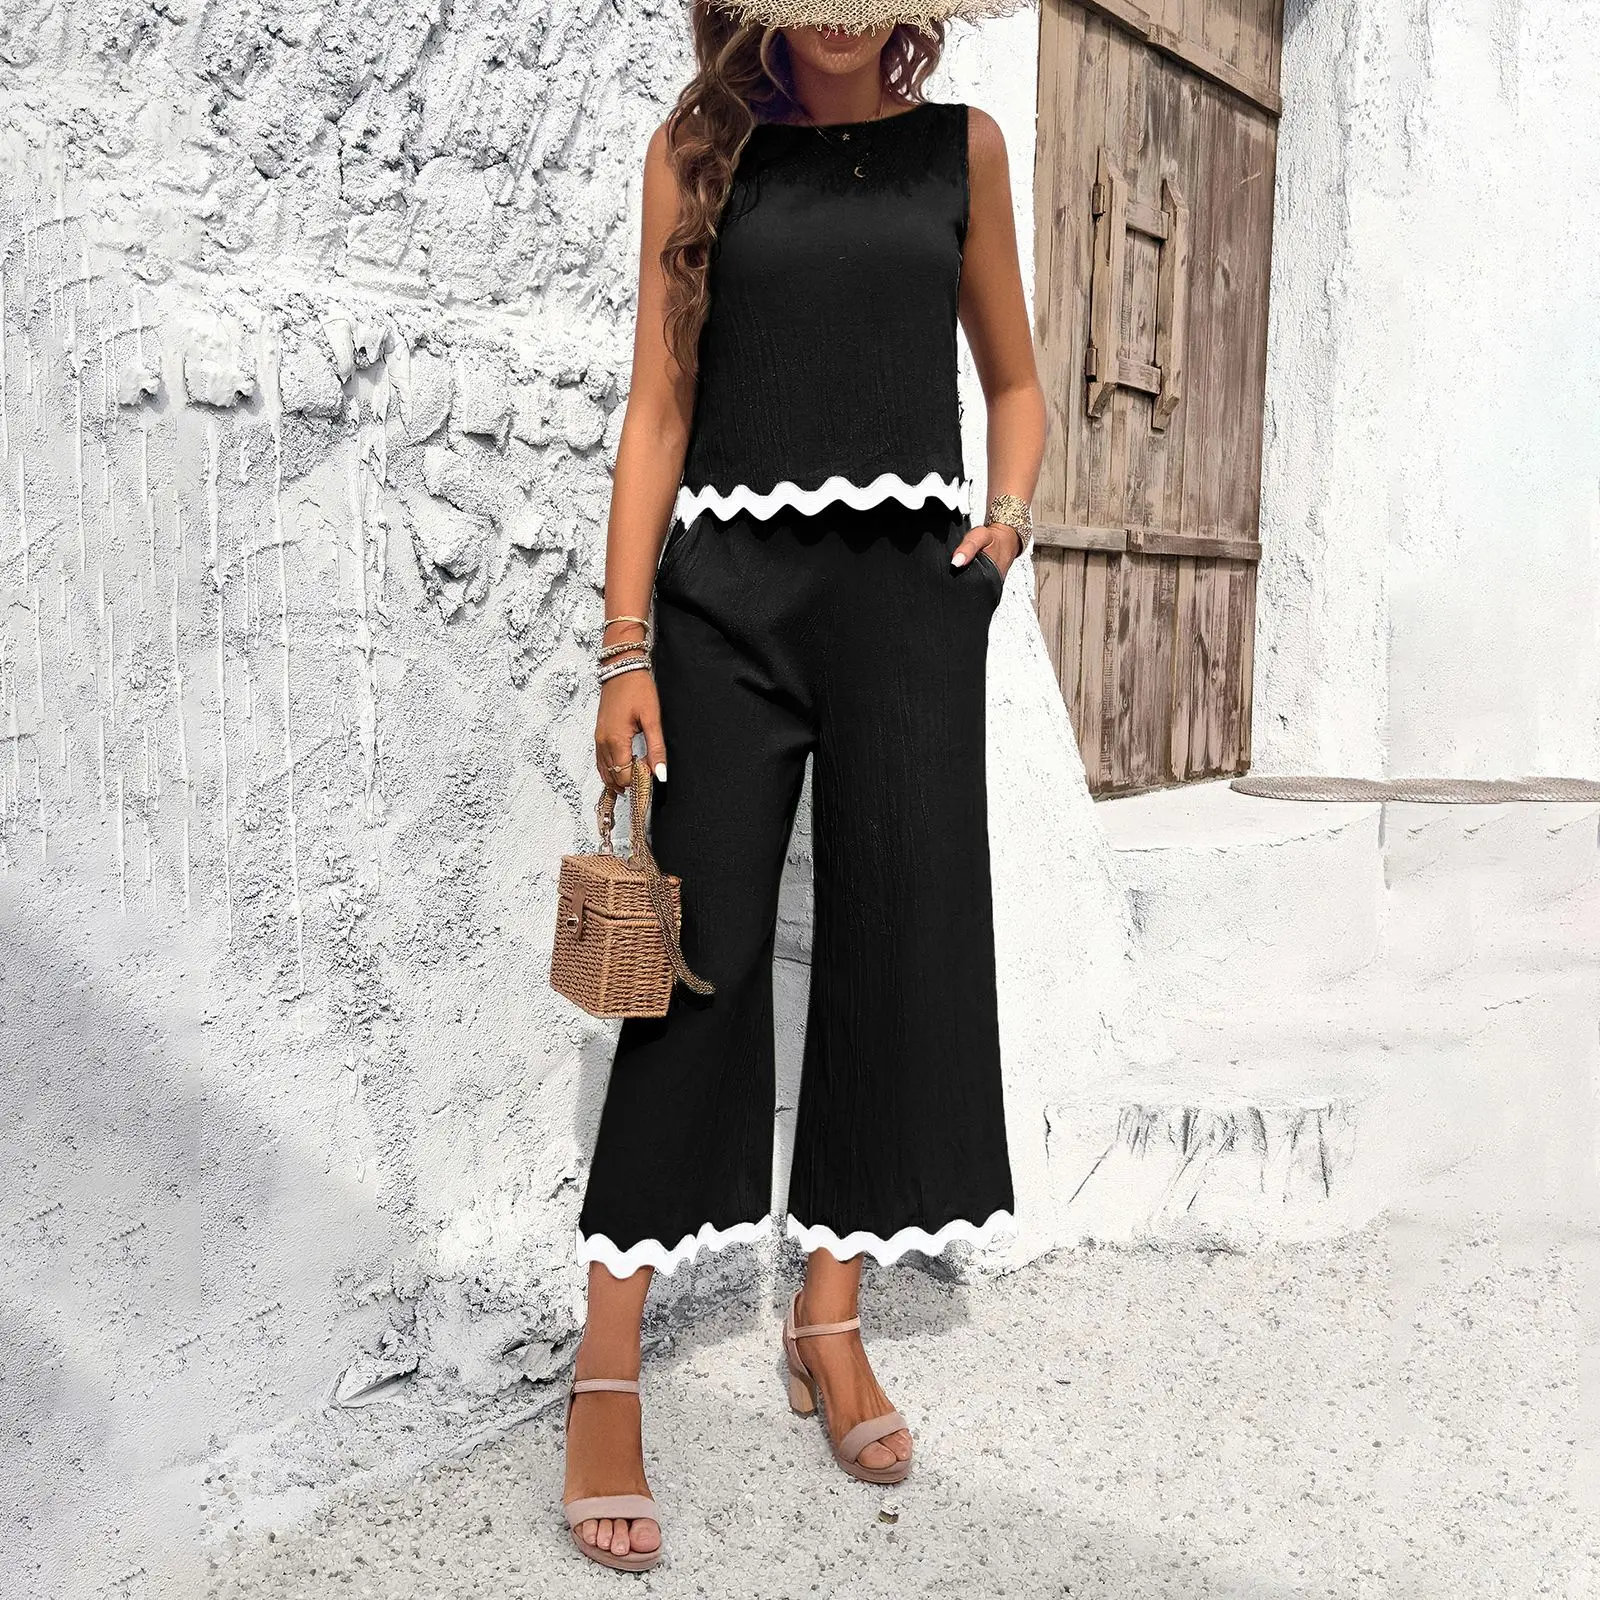 YEAE Casual Threaded Knit Long Sleeve Shorts Set Long Sleeve Top Three Quarter Pants Striped Women's Suit Temperament Commuter 2023 summer temperament elegant commuter jumpsuit shorts fashion casual one shoulder sleeve lace up slim solid color jumpsuit xl